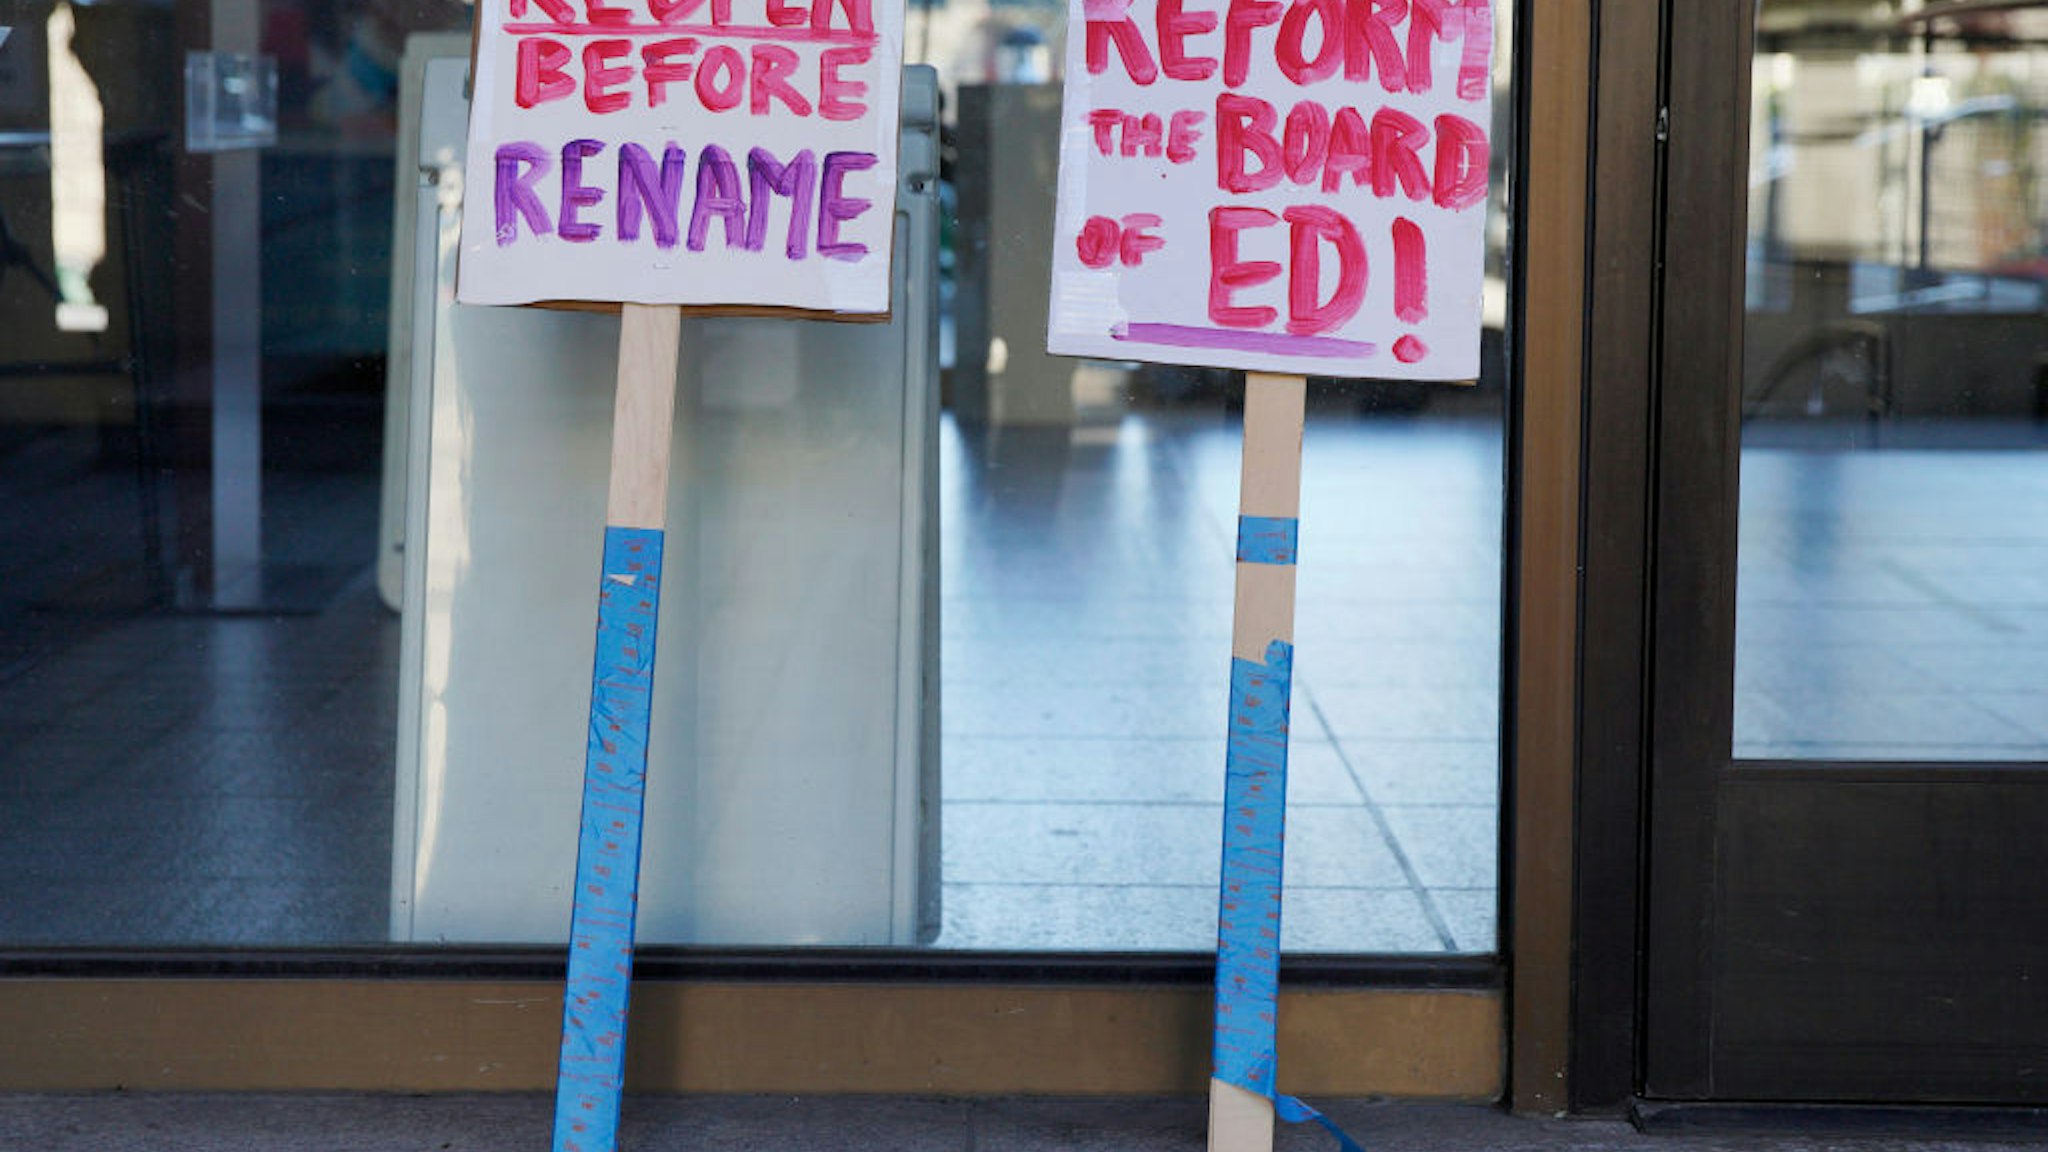 SAN FRANCISCO, CA - FEB. 6: Protesters leave their signs outside the SFUSD building after a rally and march, Saturday, Feb. 6, 2021, in San Francisco, Calif. People protested against remote education and demanded schools to reopen in-person education.